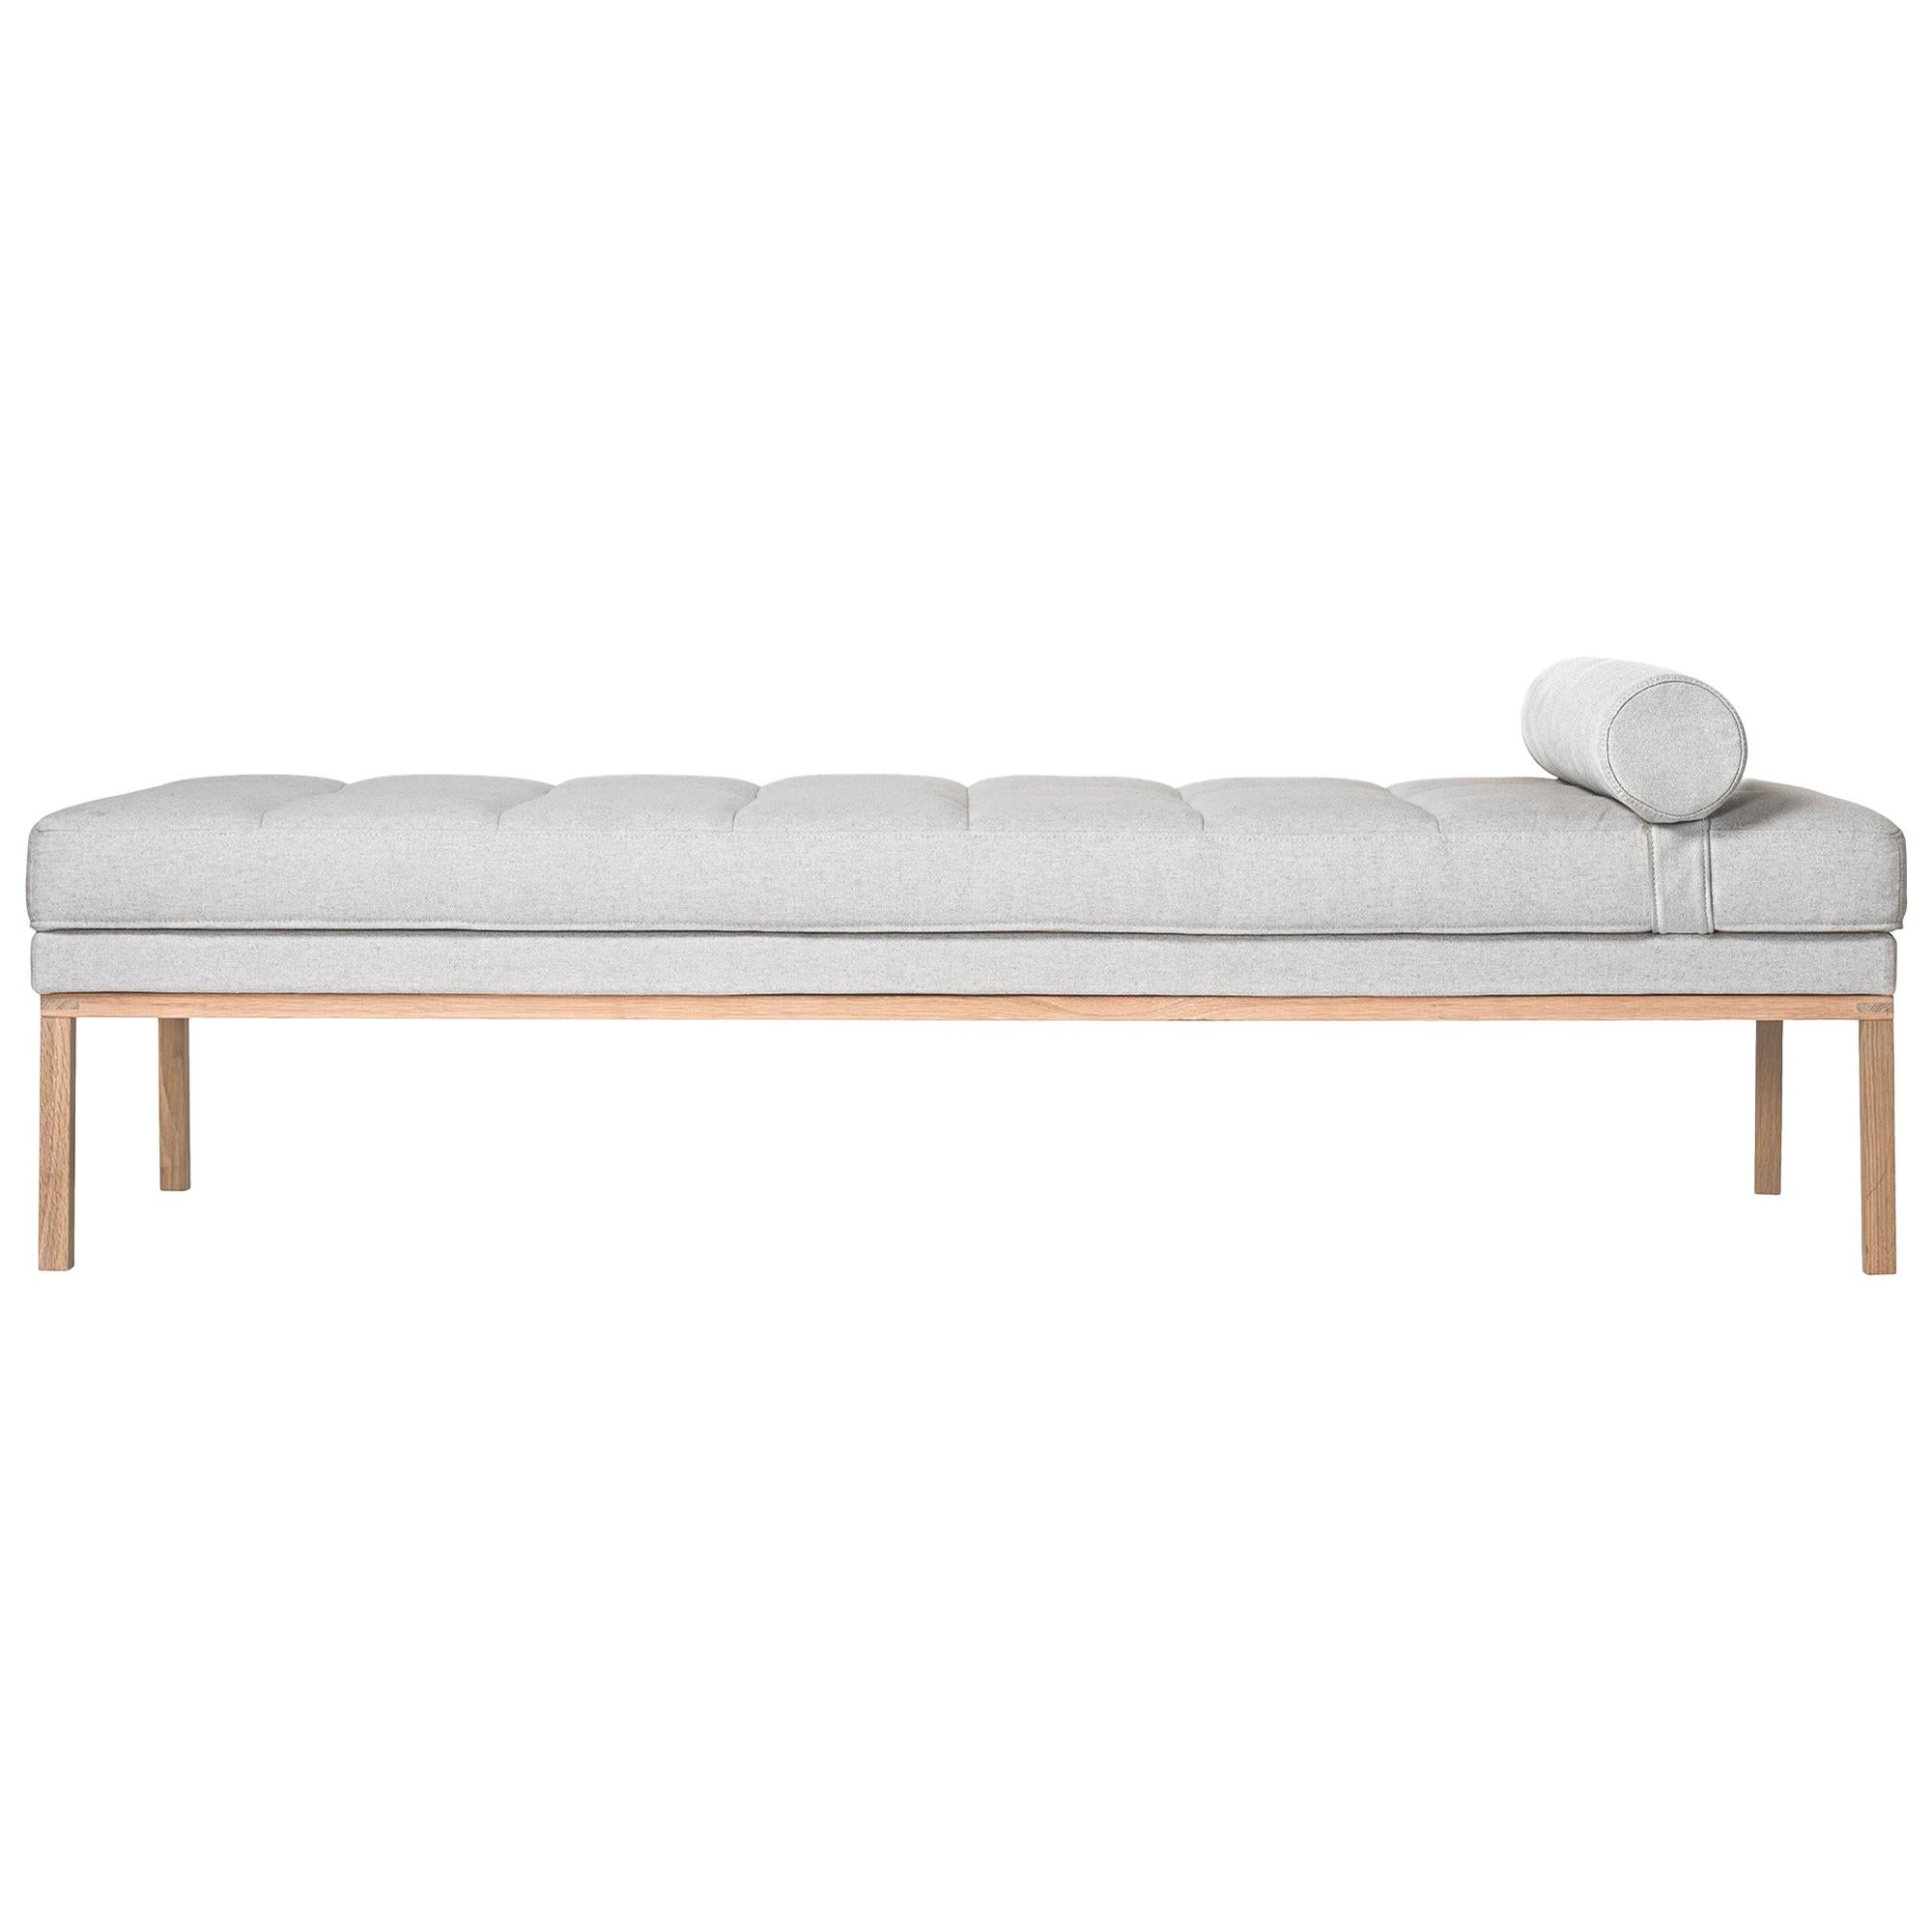 Modern Line Smoked Oakwood and Light Grey Cotton Fabric Daybed